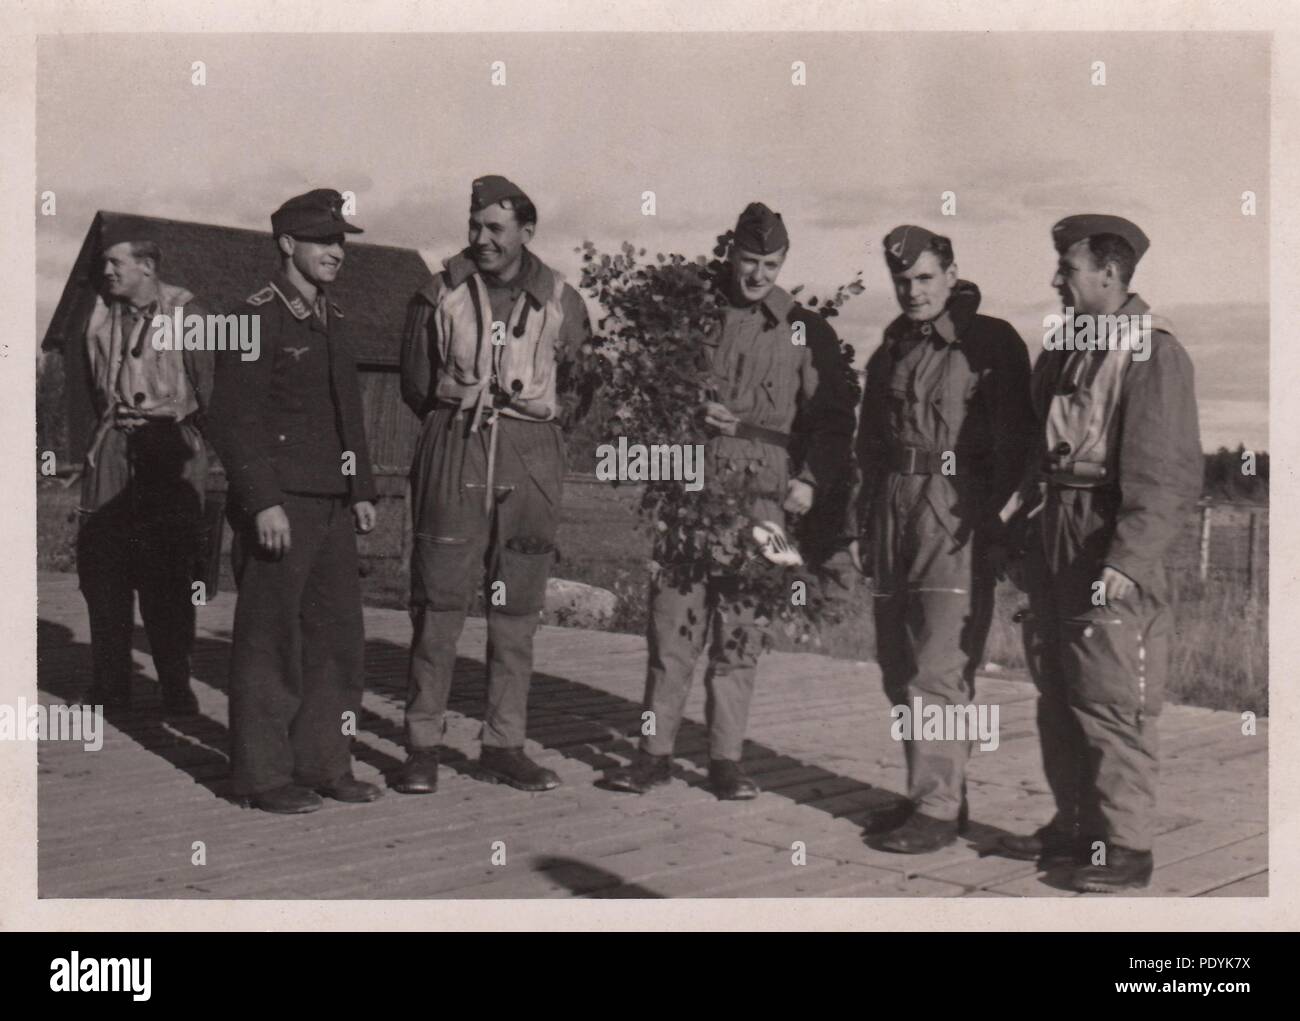 Image from the photo album of Feldwebel Willi Hoffmann of 5. Staffel, Kampfgeschwader 30: Willi Erkens and his crew from 5./KG 30 celebrate their 100th mission in the autumn of 1942. From left to right: unknown airman, unknown Feldwebel, Feldwebel Willi Hoffmann (Air Gunner), Oberfeldwebel Otto Bienmüller (Radio Operator), Leutnant Willi Erkens (Pilot), Oberfeldwebel Richard Müller (Observer). The entire crew failed to return from a mission in the Mediterranean on 23rd January 1943. Stock Photo